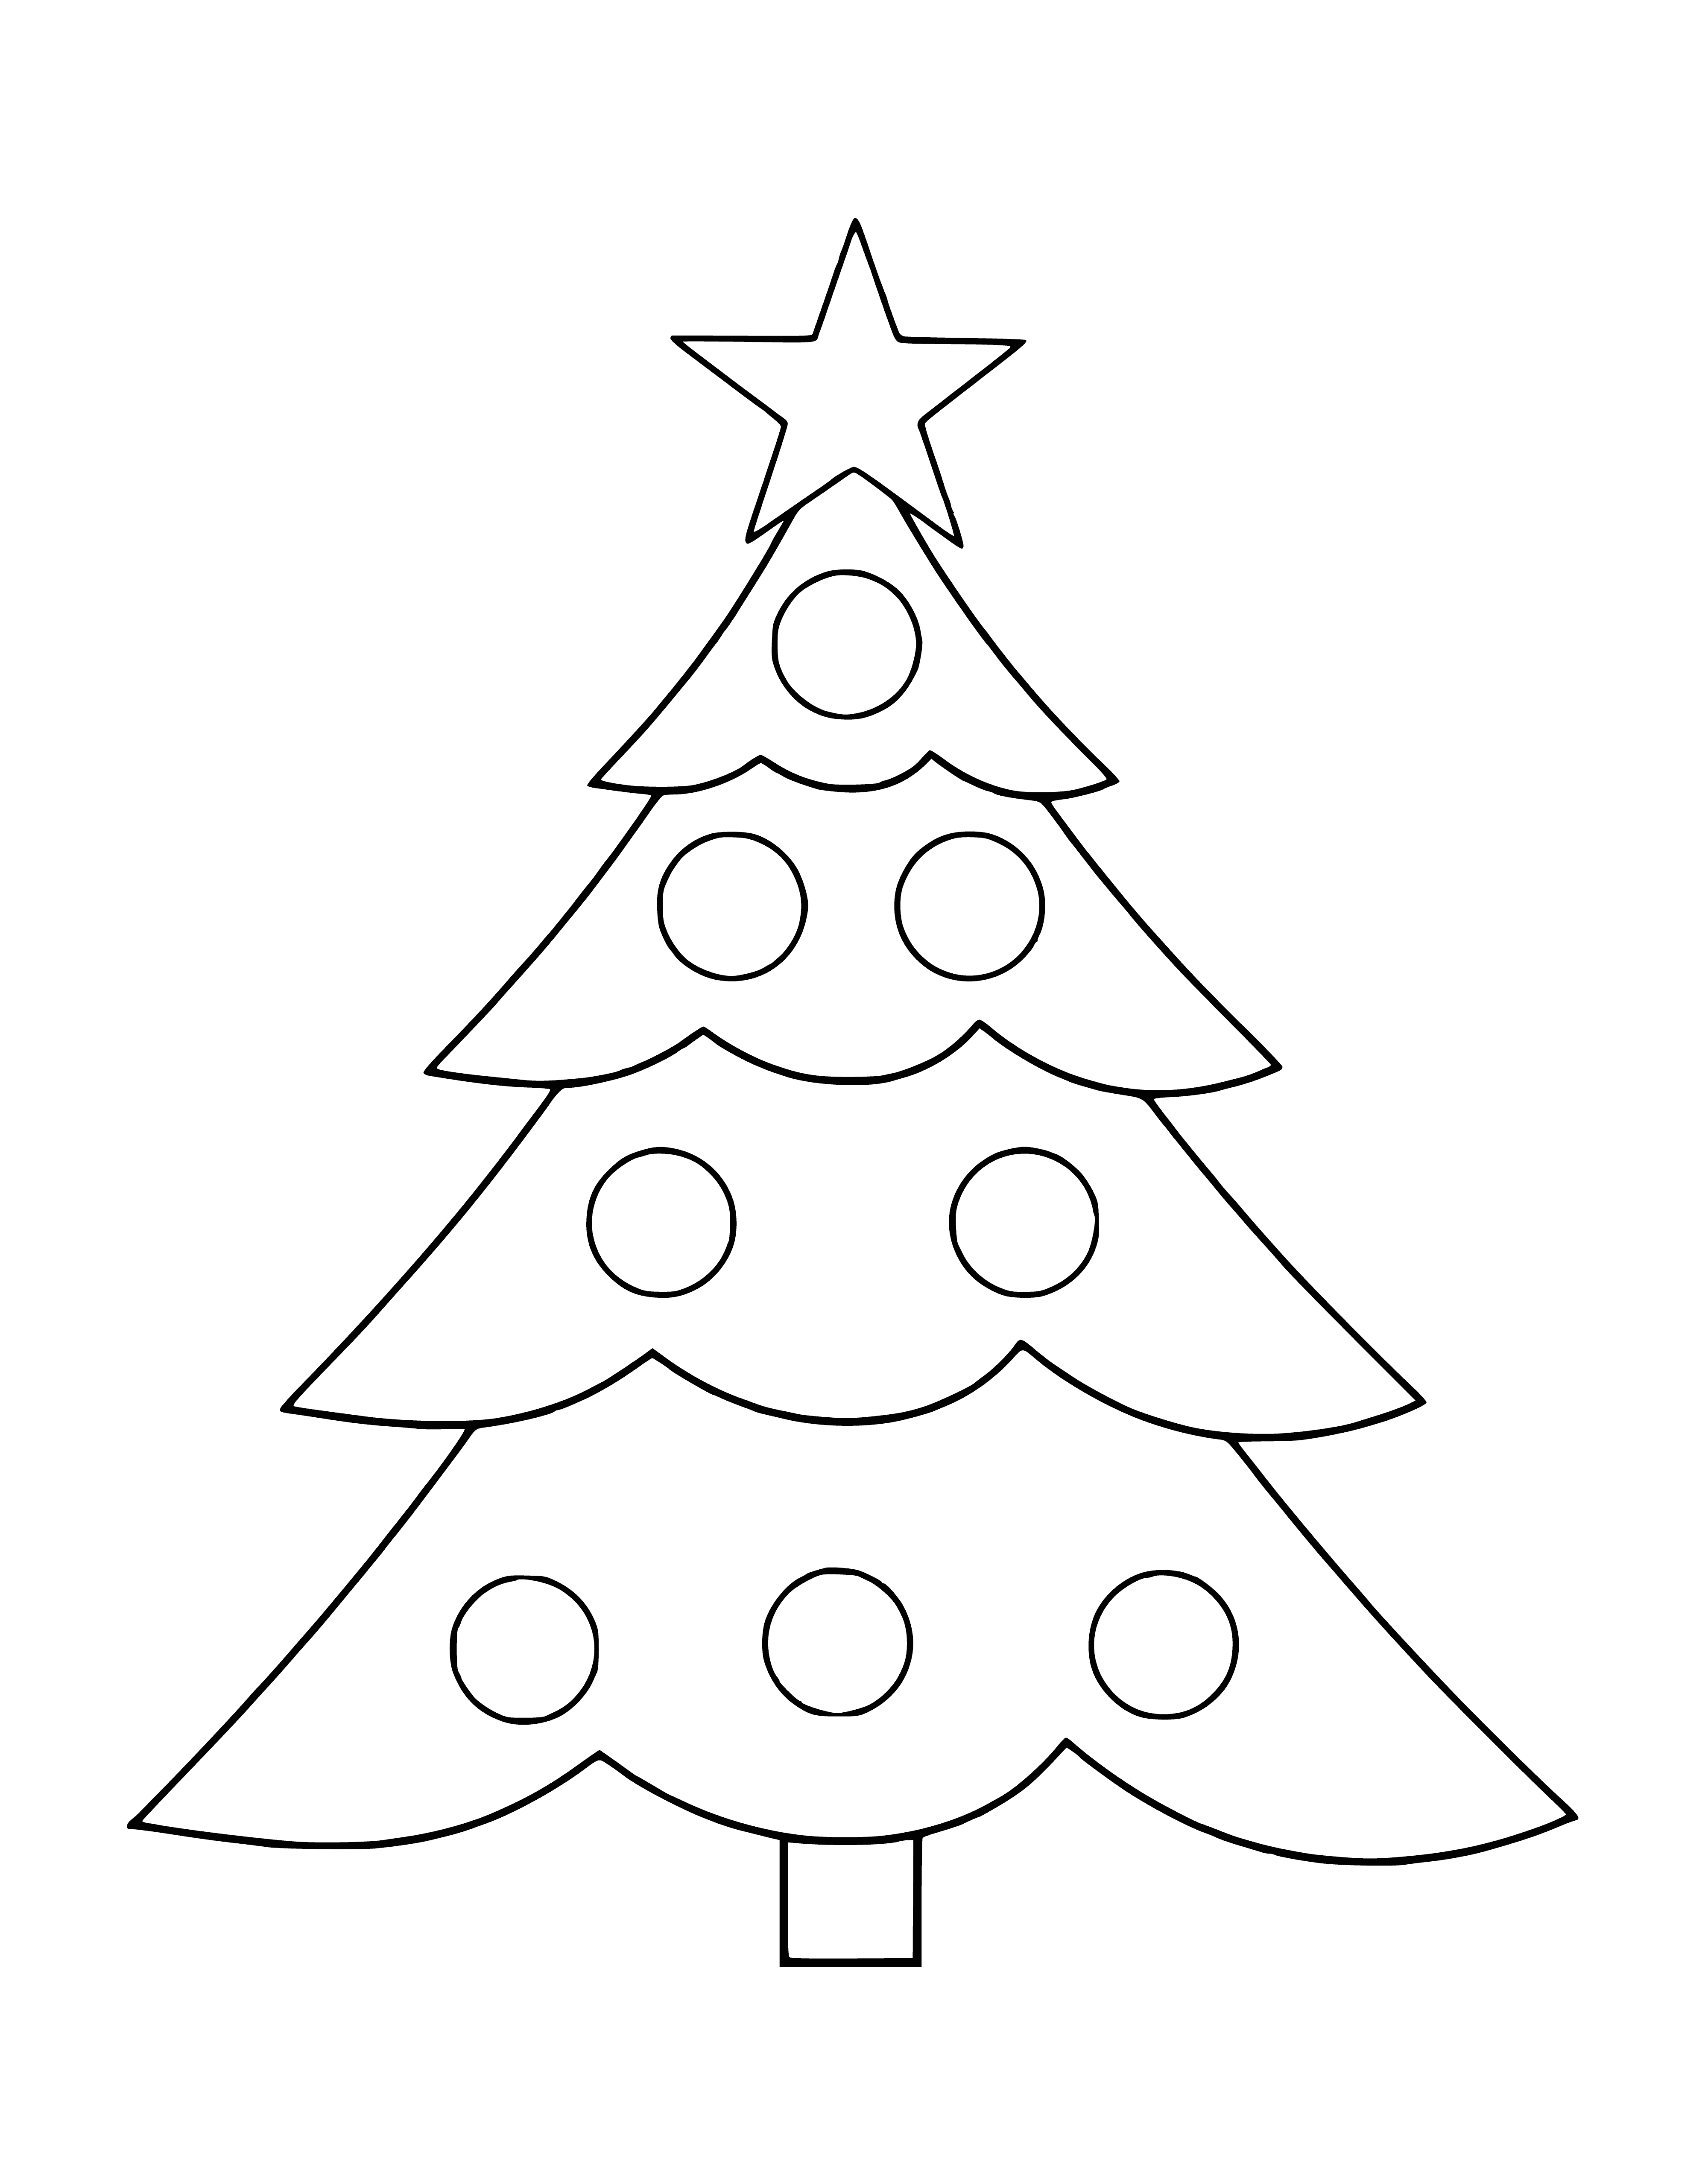 A festive golden Christmas tree adorned with ornaments & wrapped in a gold ribbon—all in one coloring page!